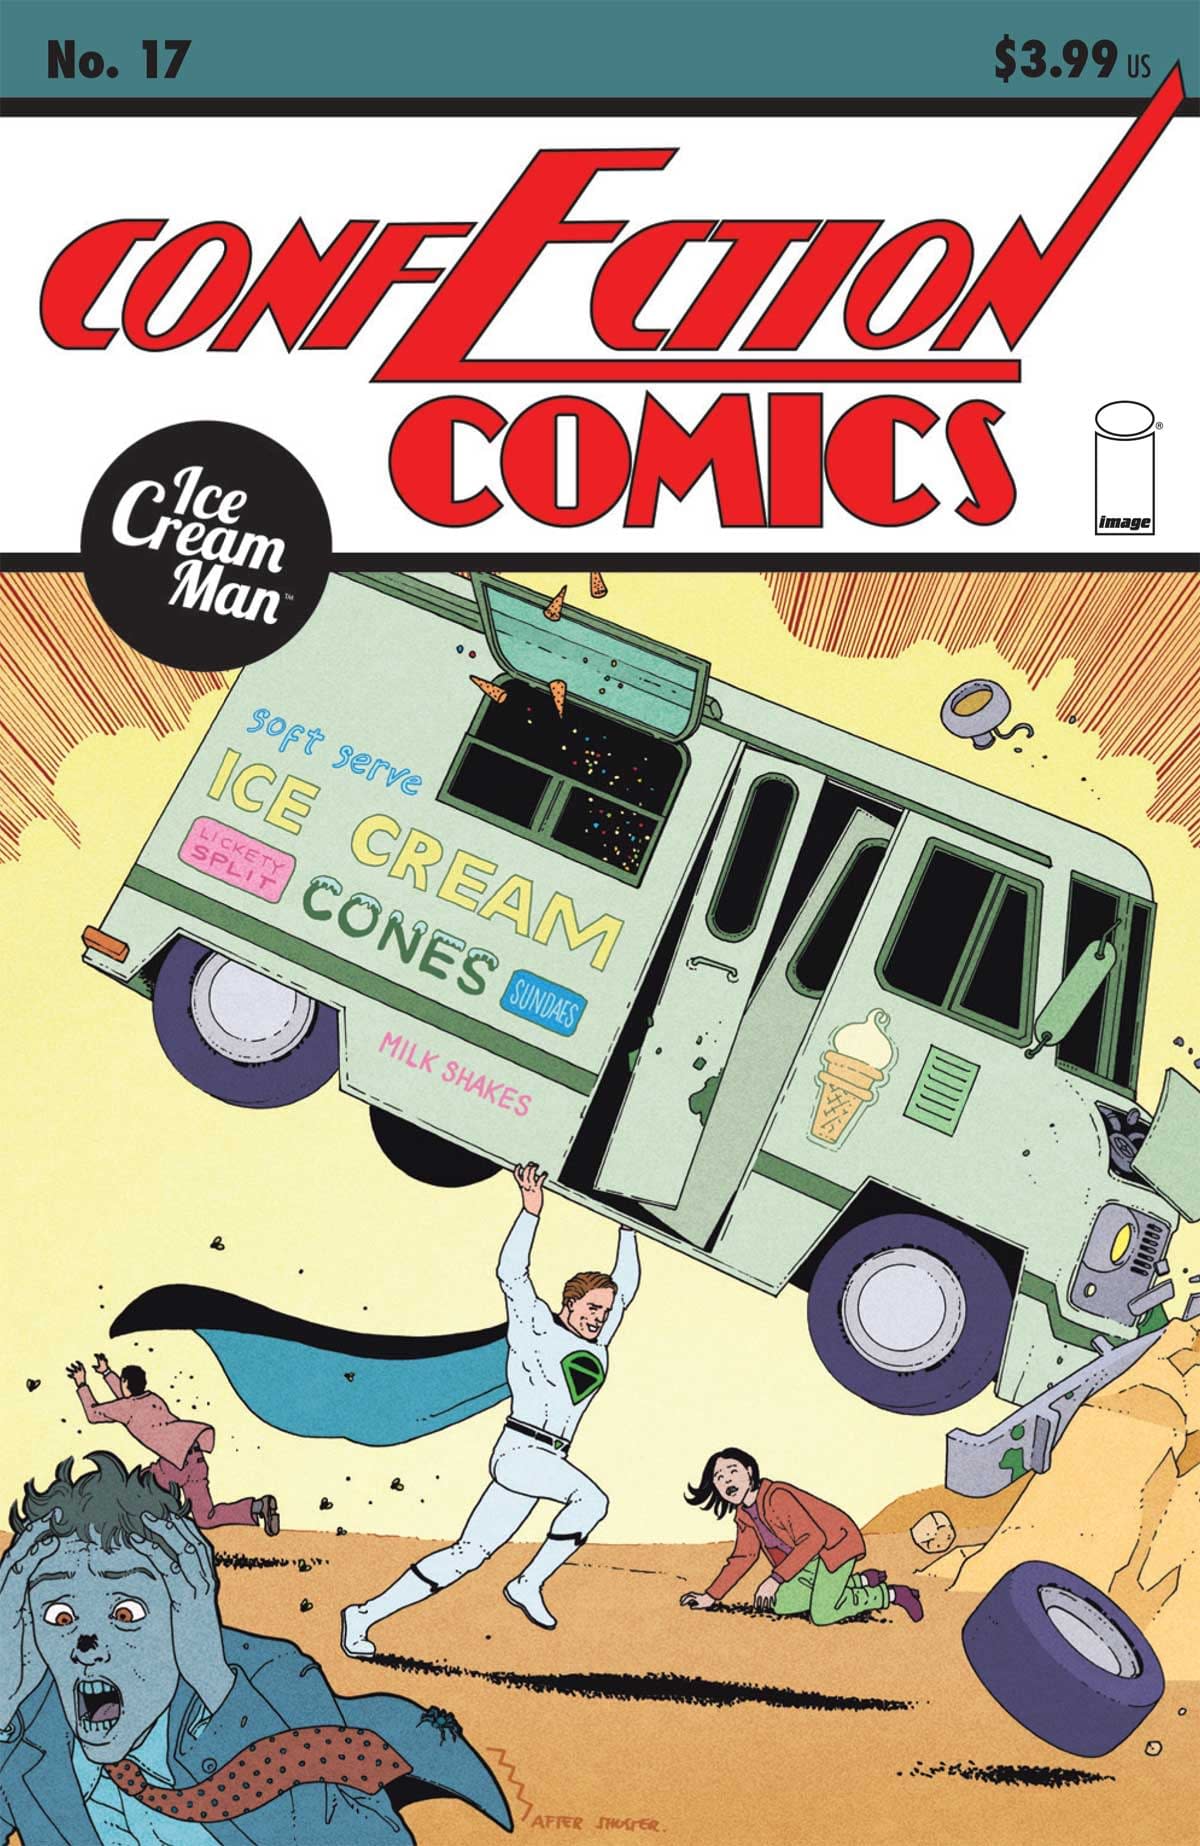 REVIEW: Ice Cream Man #17 -- "... Whaaaaaat Exactly Was This Supposed To Be?"